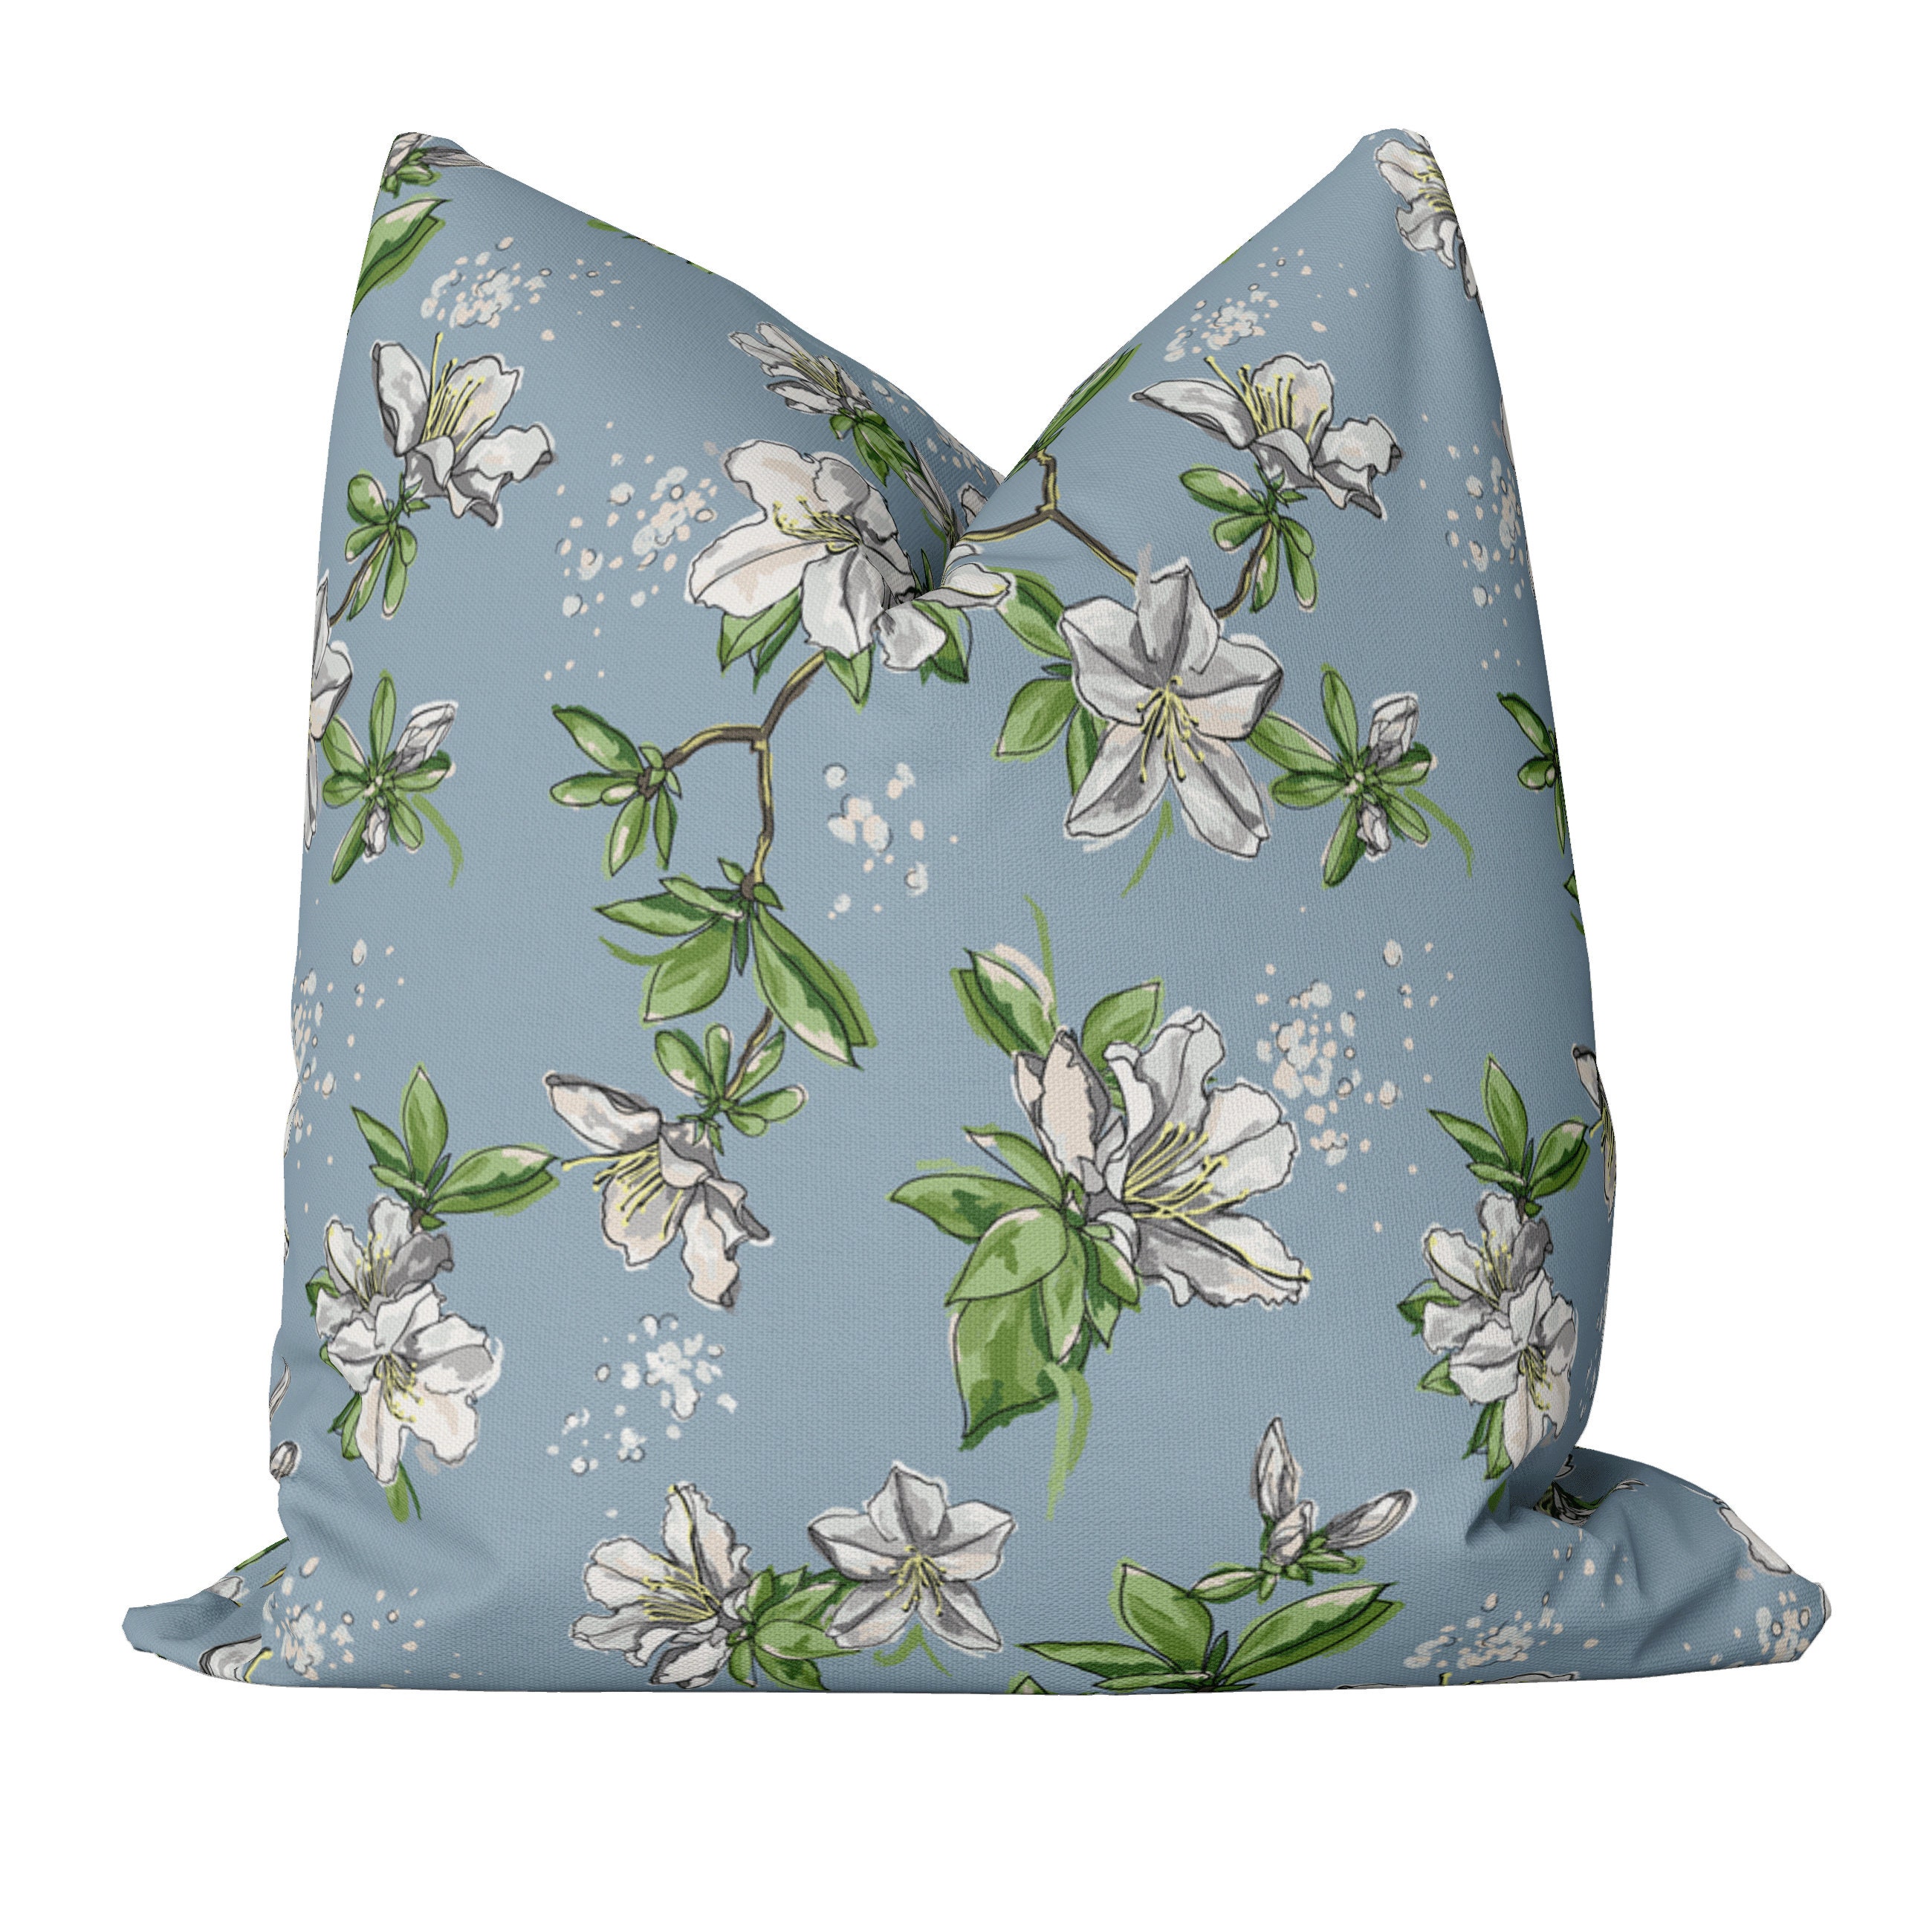 Julia King Bed Pillow Cover Set in Wistful  Blue-green-gray-white-floral-stripe-luxury-accent Pillows-coordinating-designer  Throw Pillows 